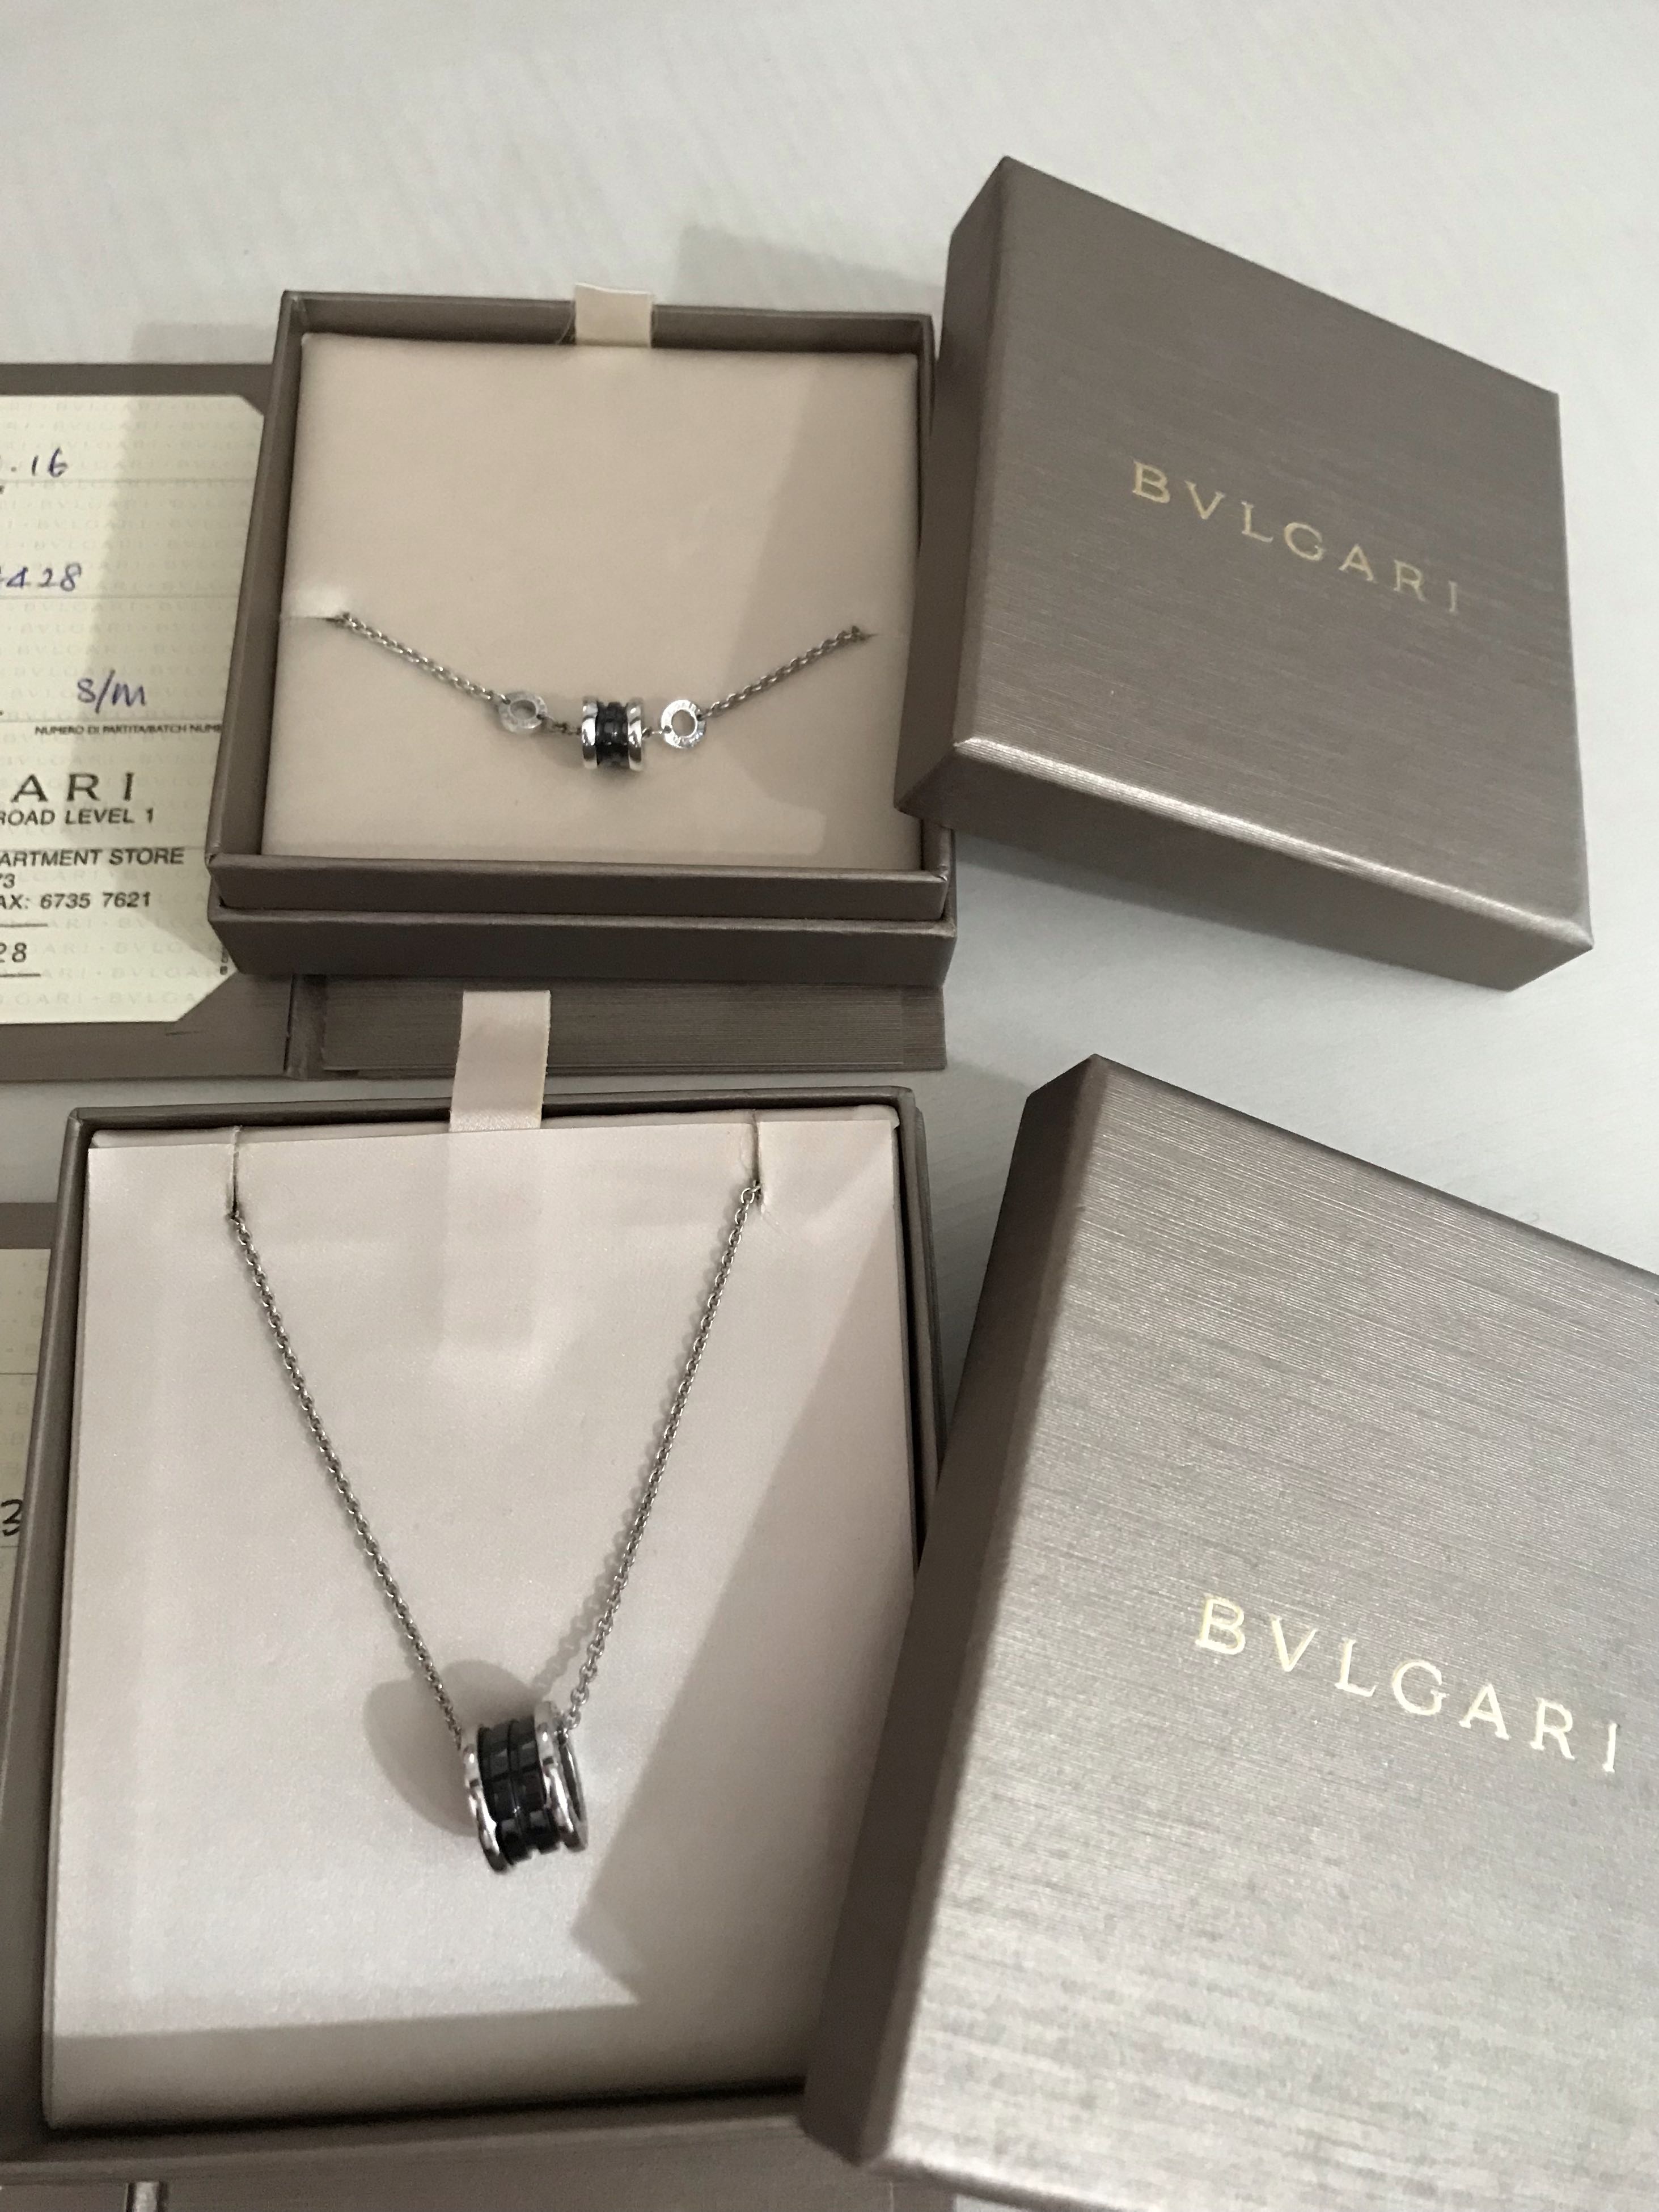 bvlgari save the child necklace review